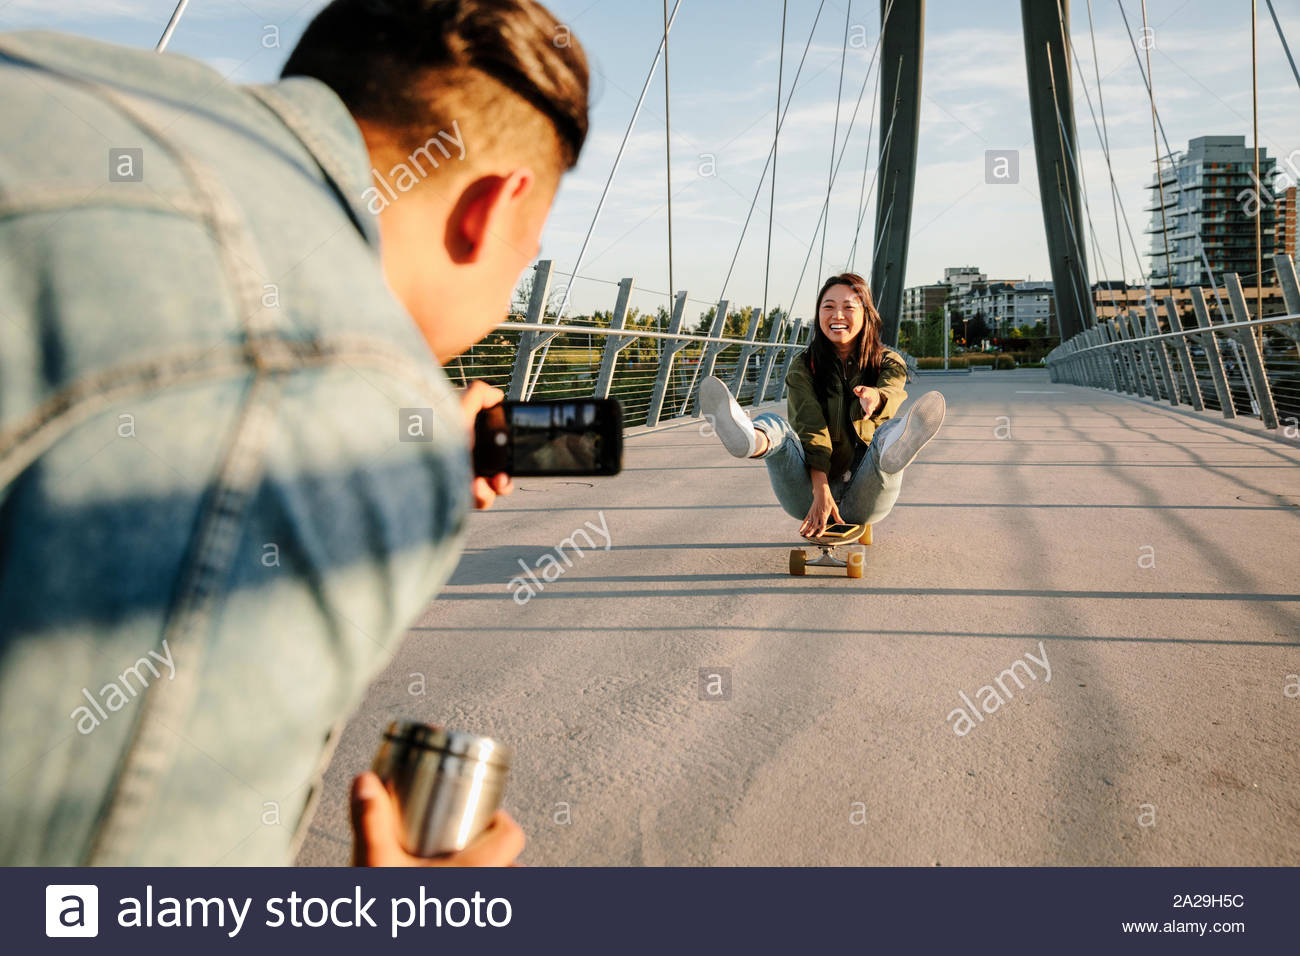 Young man with camera phone photographing playful girlfriend on skateboard Stock Photo